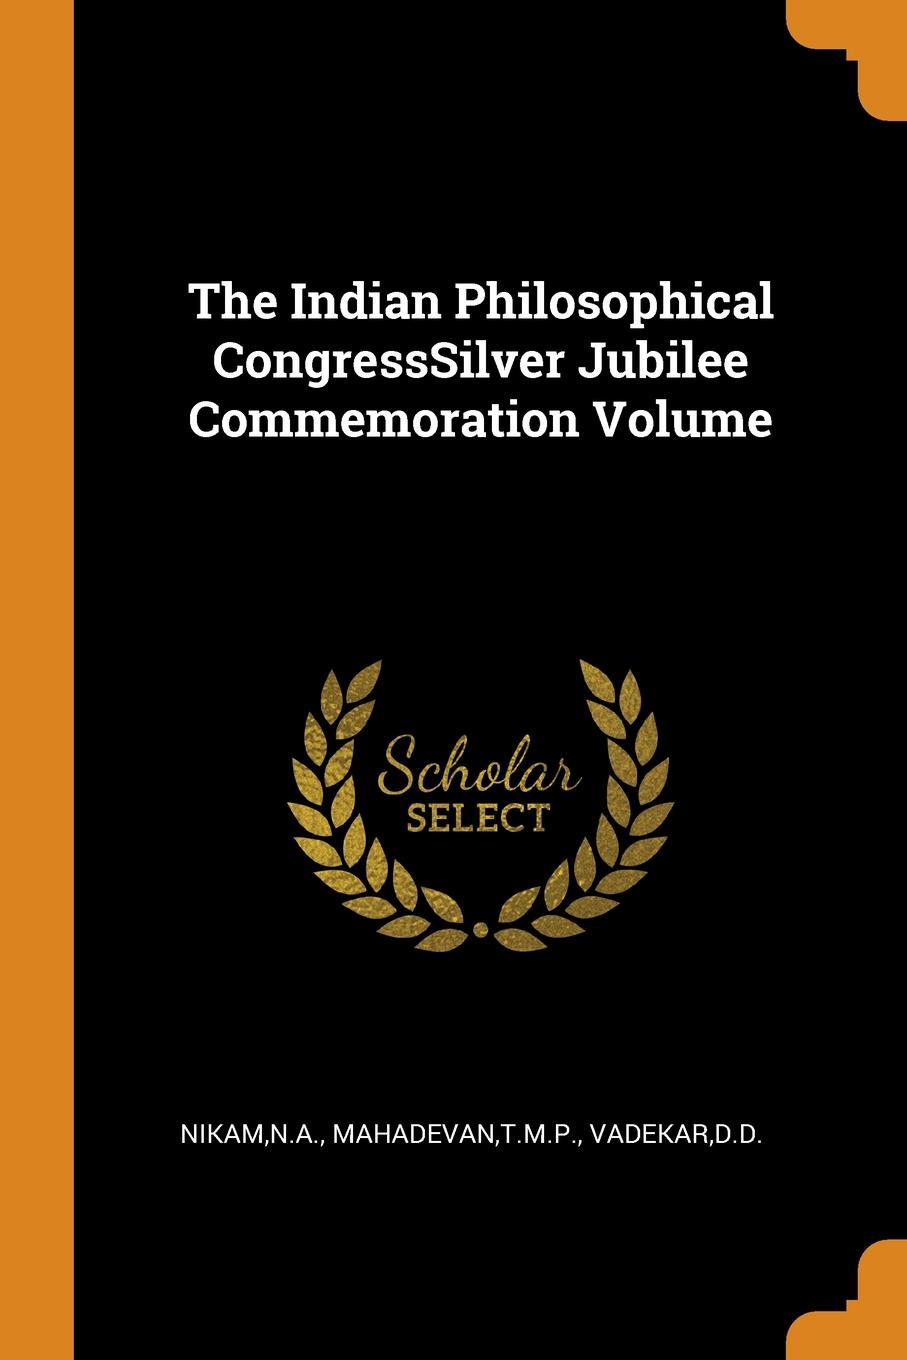 The Indian Philosophical CongressSilver Jubilee Commemoration Volume